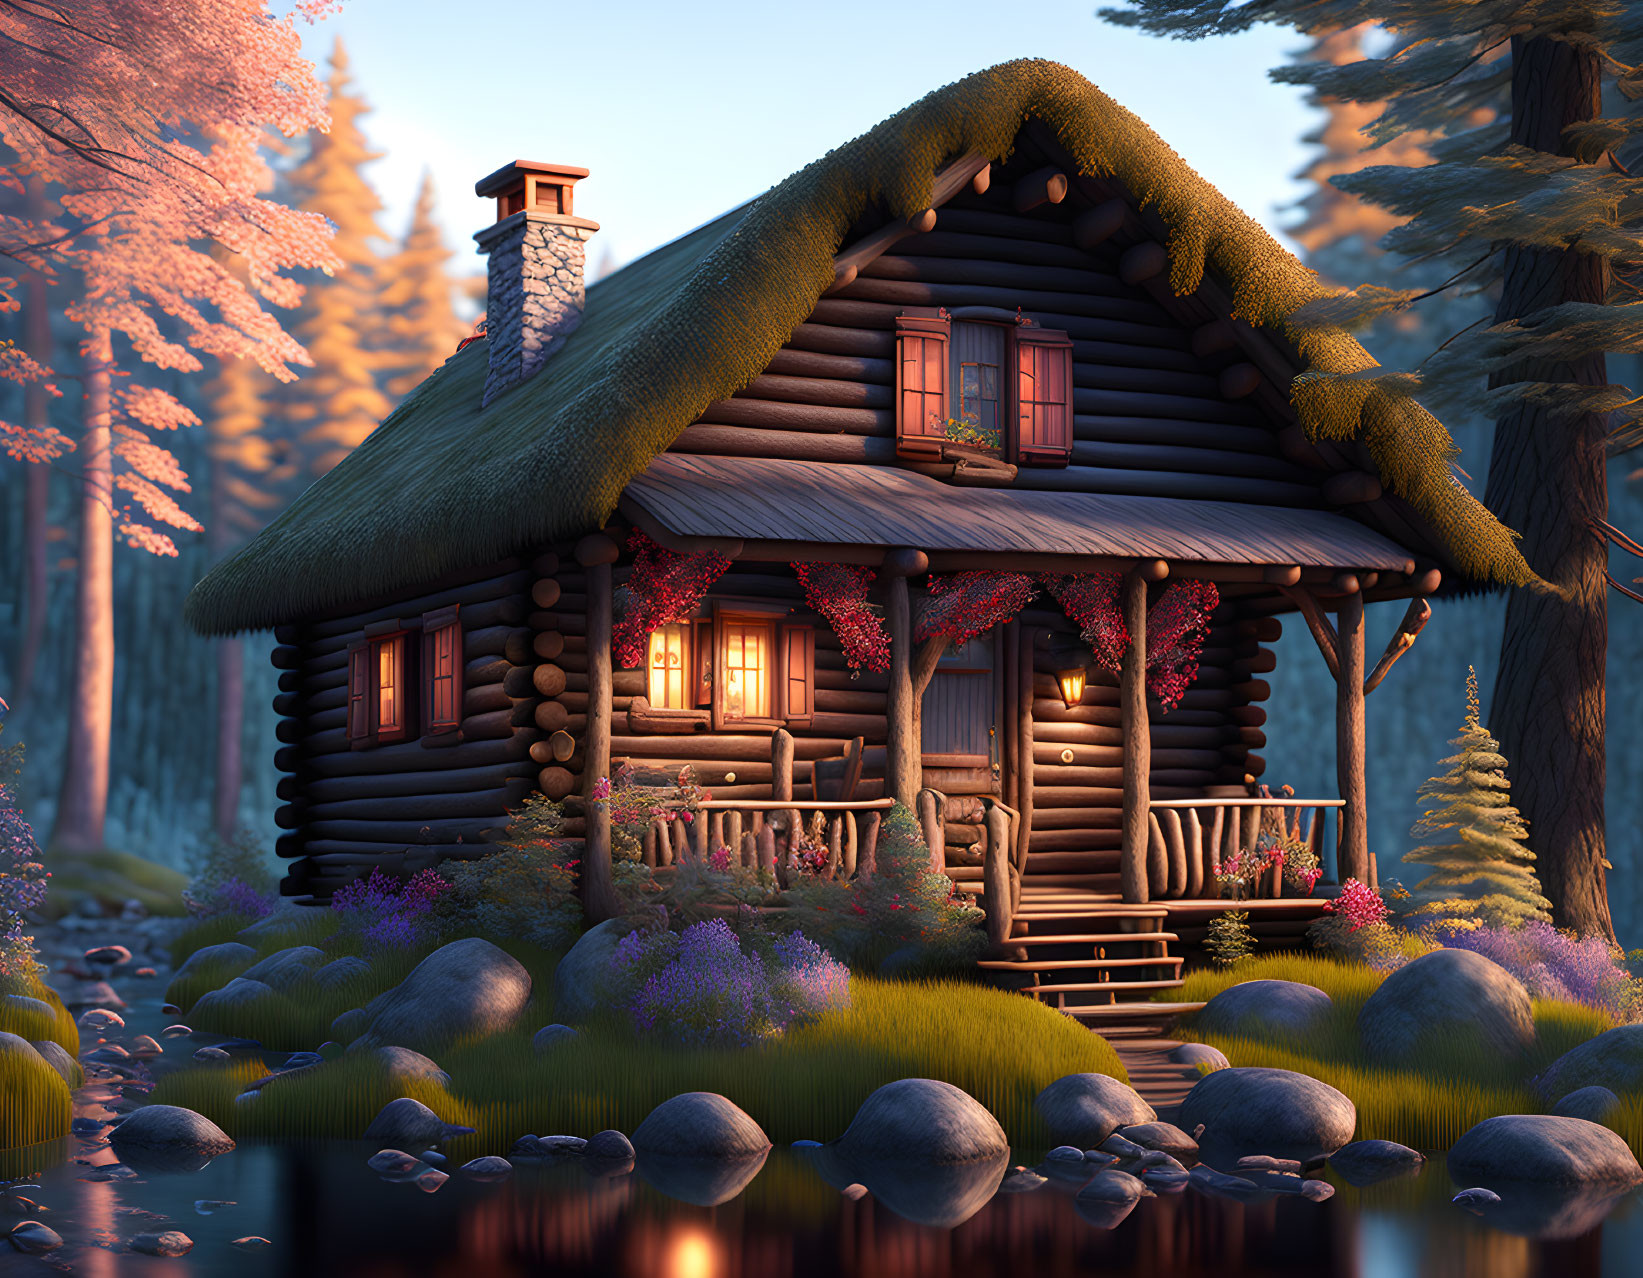 Rustic log cabin in forest with thatched roof at sunset